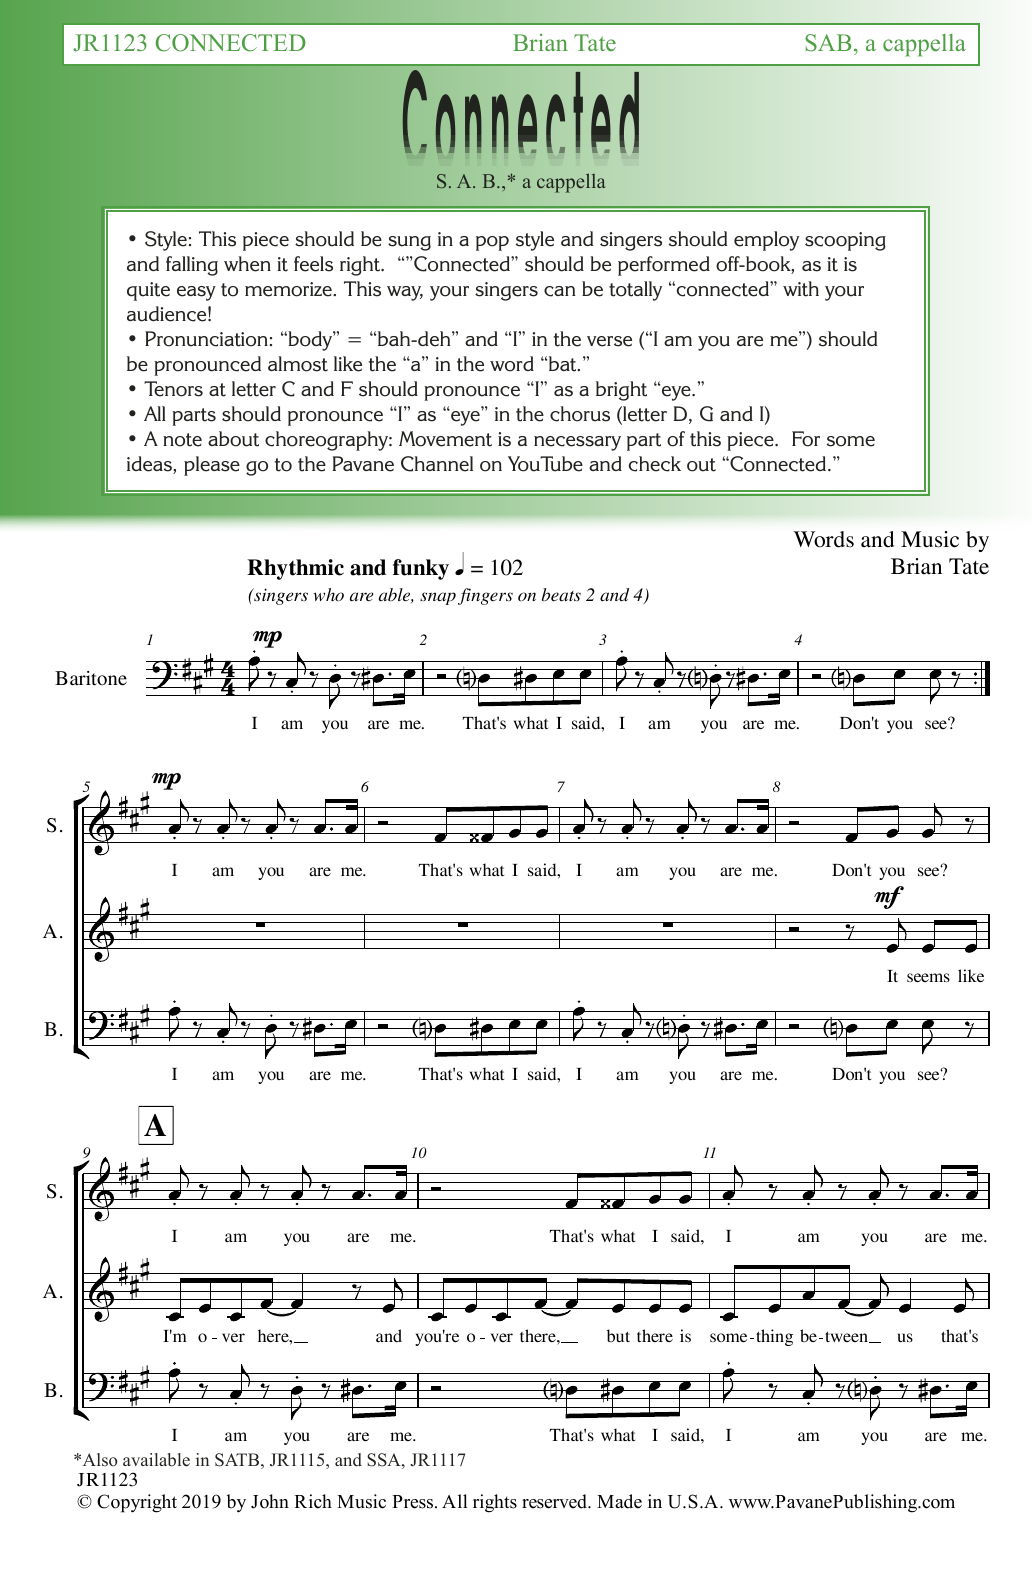 Download Brian Tate Connected Sheet Music